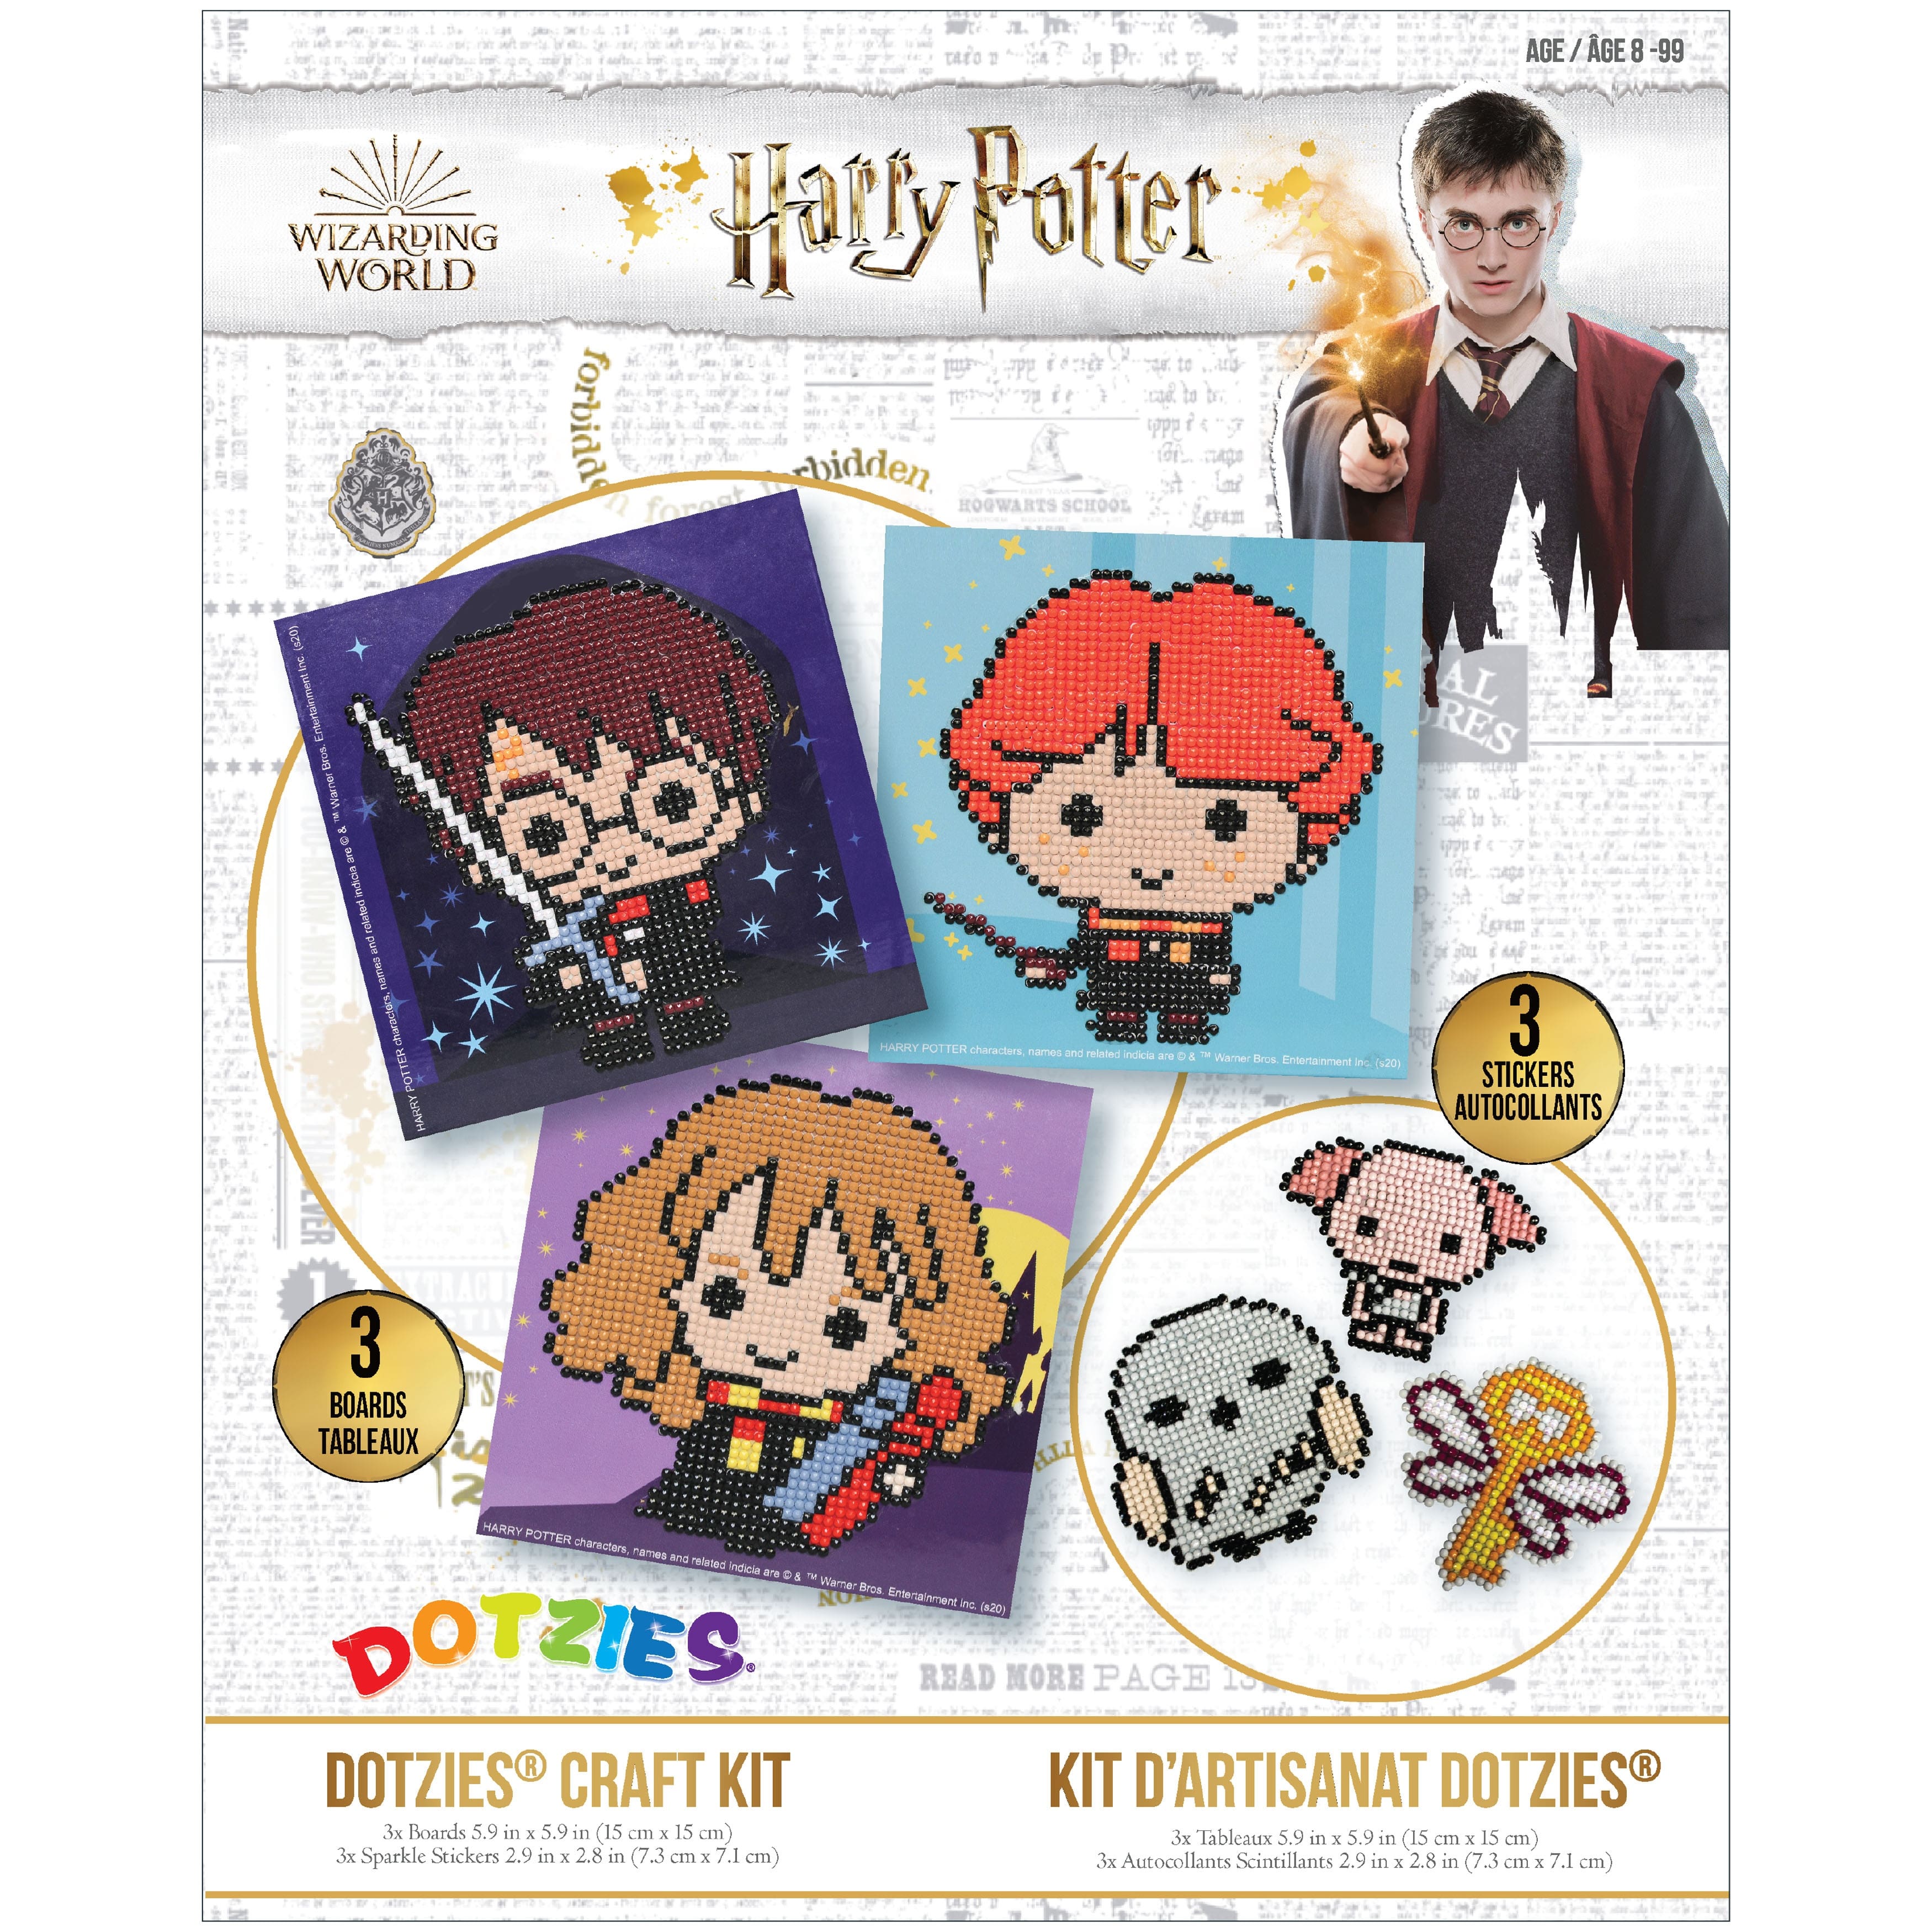 Harry Potter Stained Glass Diamond Art Painting Kit, From Diamond Dotz NEW,  Please See Item Description and Pictures for More Information 